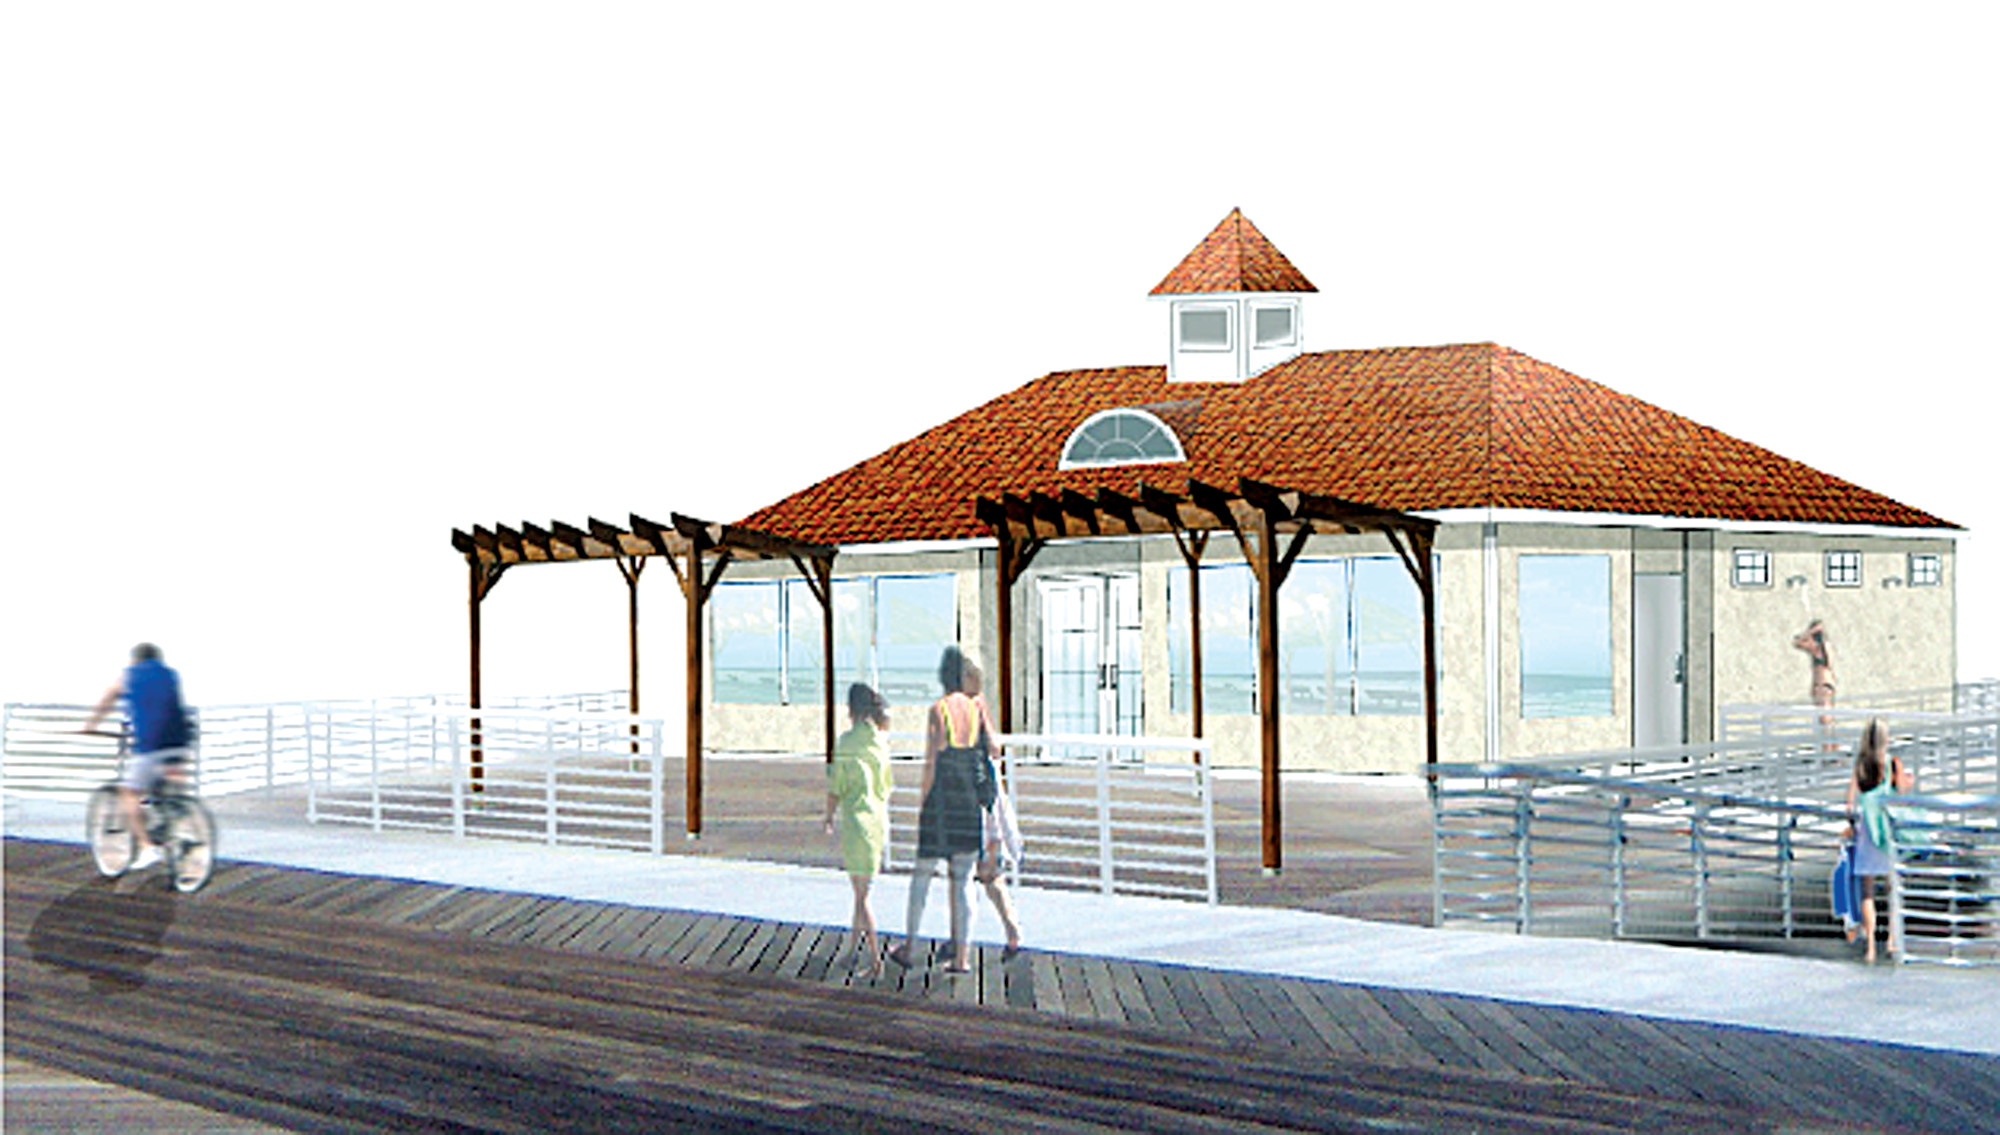 The city presented a rendering of new comfort stations and concessions that will be built along the boardwalk at Riverside, Edwards and Grand boulevards.